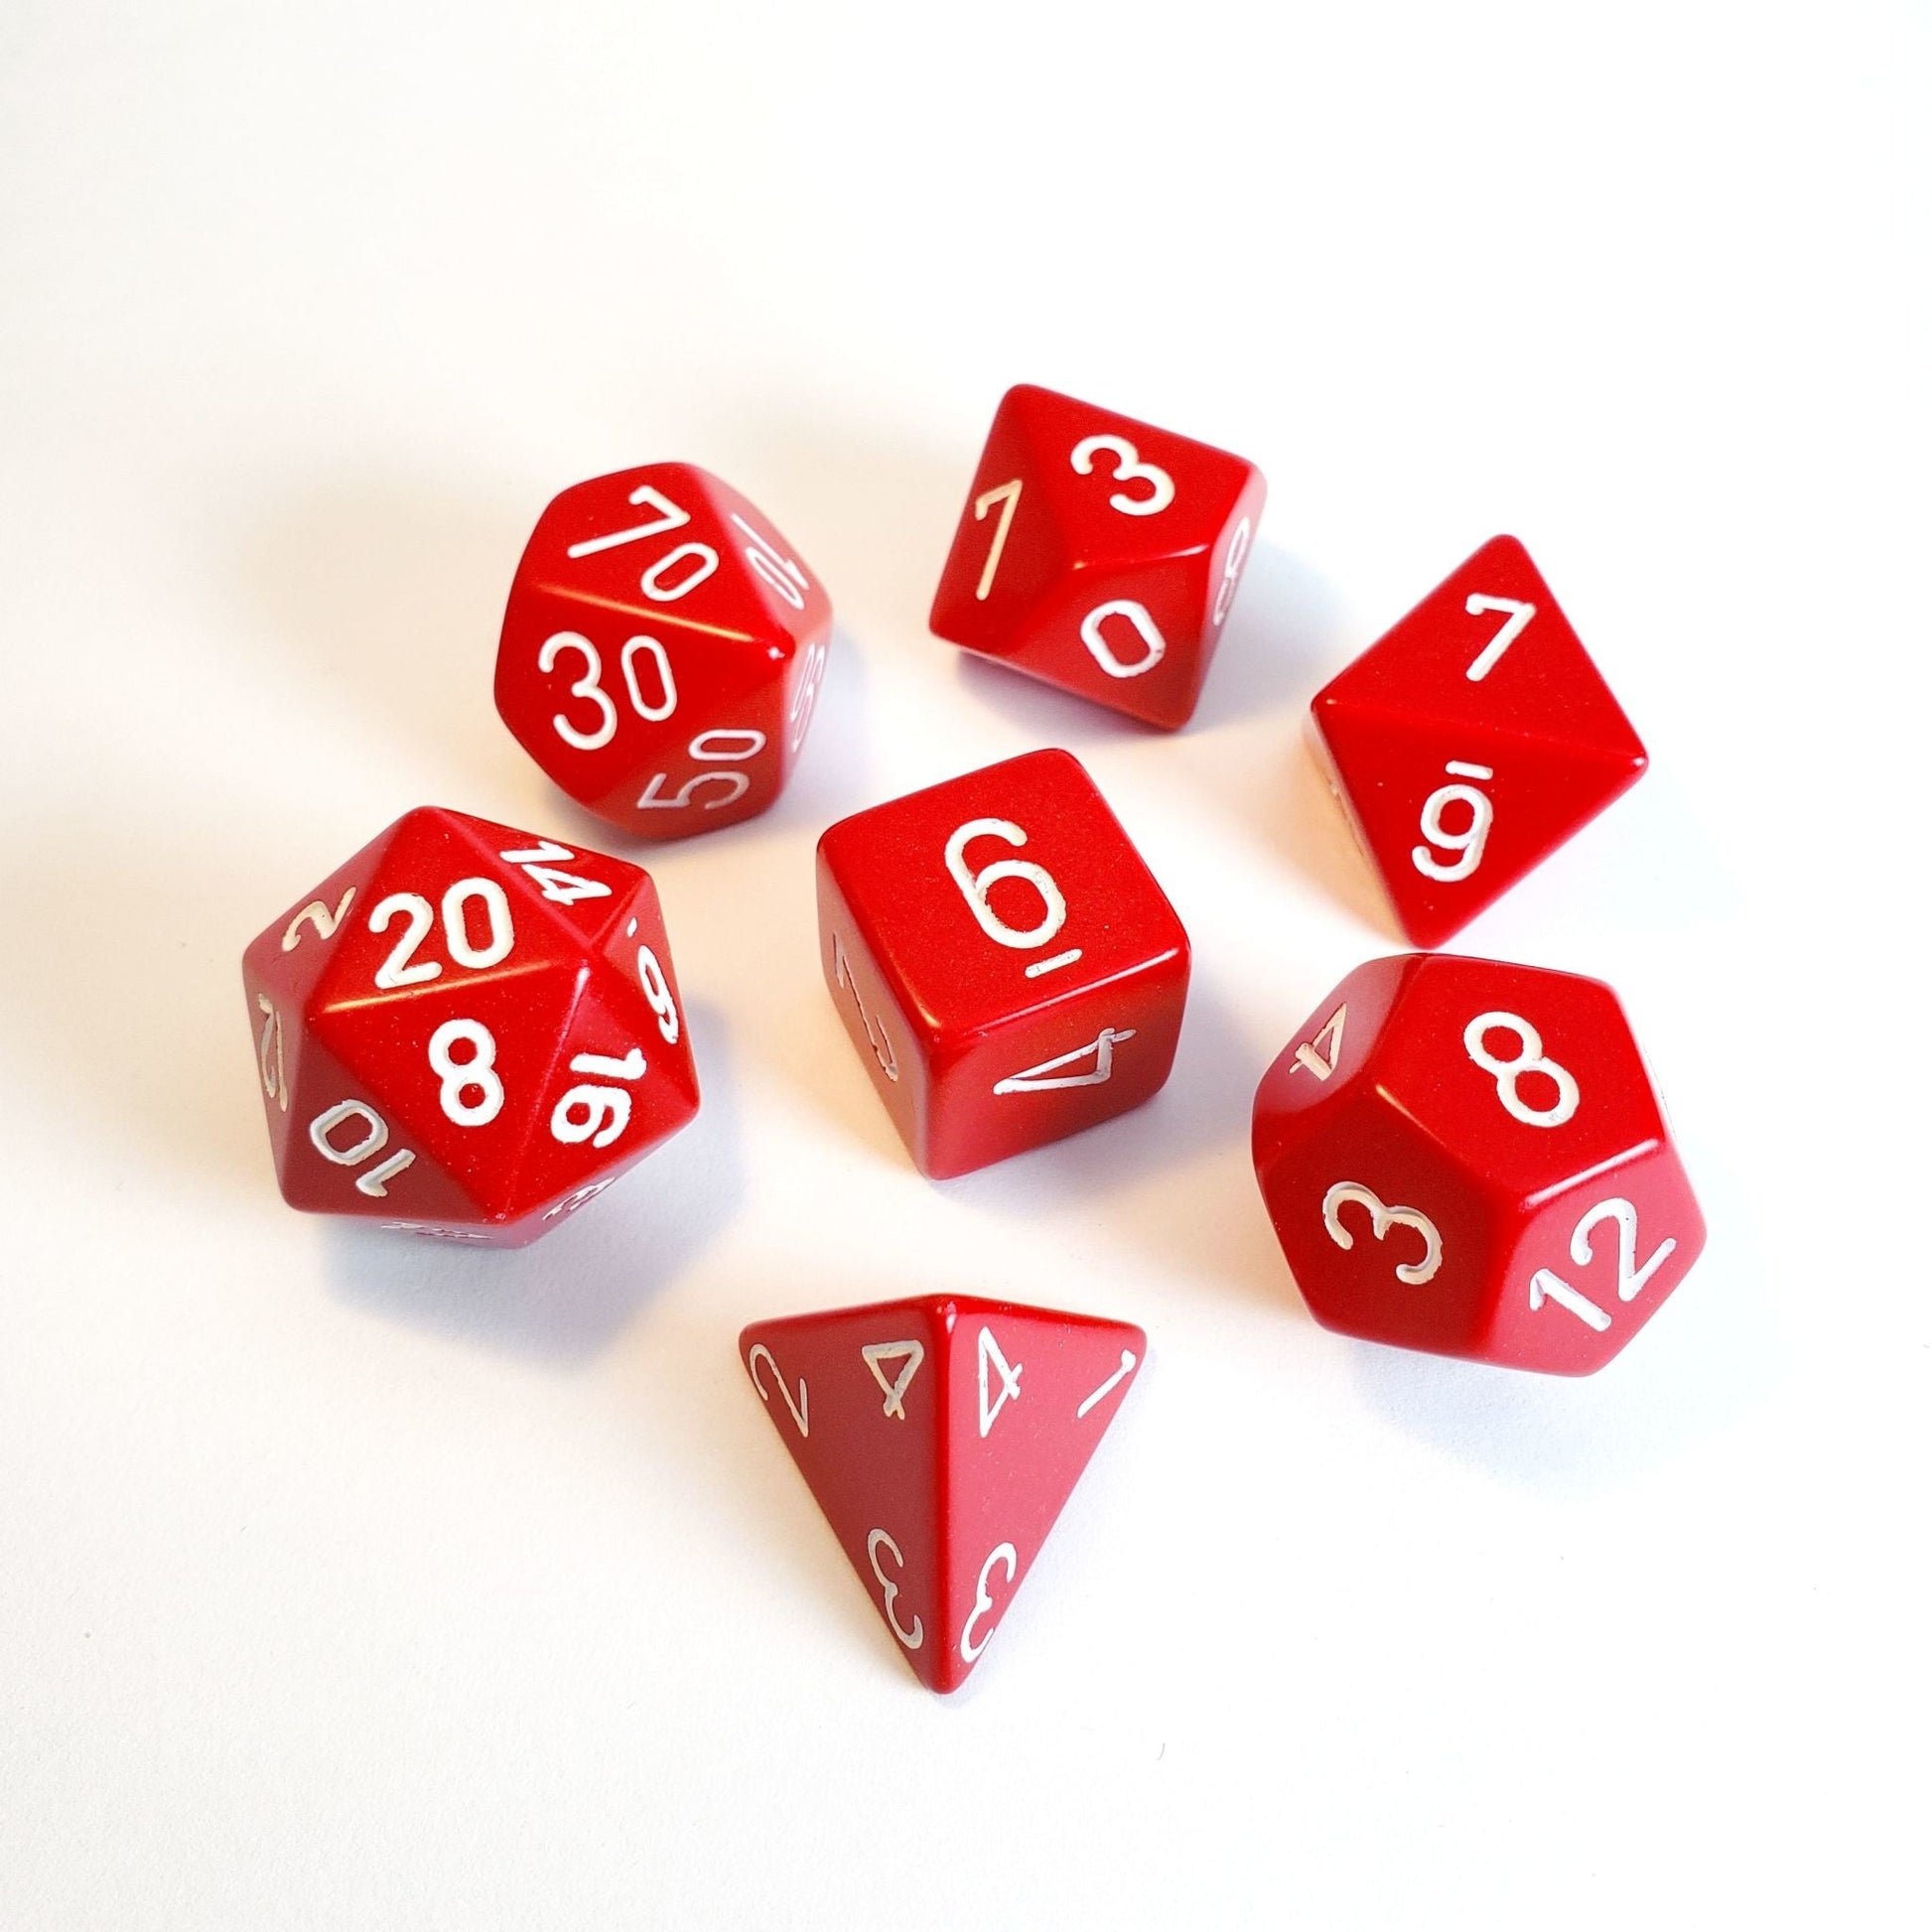 Chessex Dice: 7 Die Set - Opaque - Red with White (CHX 25404) - Gamescape